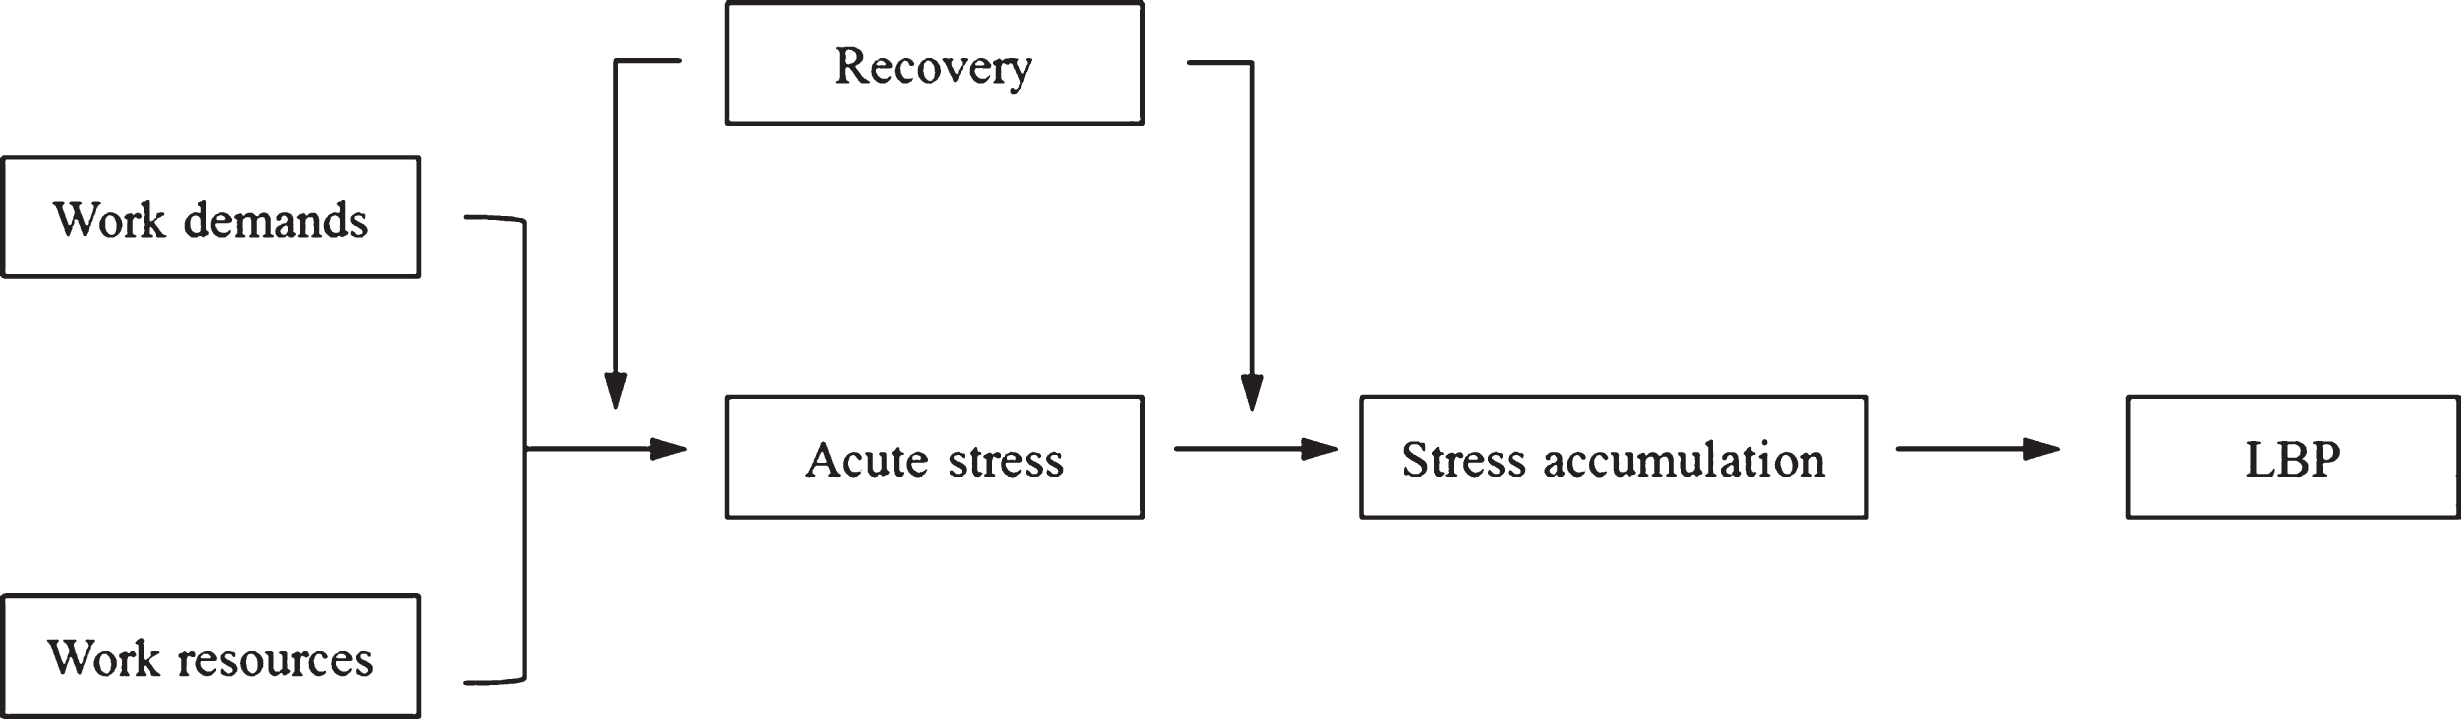 The role of recovery for BP prevention and rehabilitation in the work context. Adapted from “The influences of recovery on low back pain development: A theoretical model,” by T. Mierswa and M. Kellmann, 2015, International Journal of Occupational Medicine and Environmental Health, 28, p. 258. doi: 10.13075/ijomeh.1896.00269.